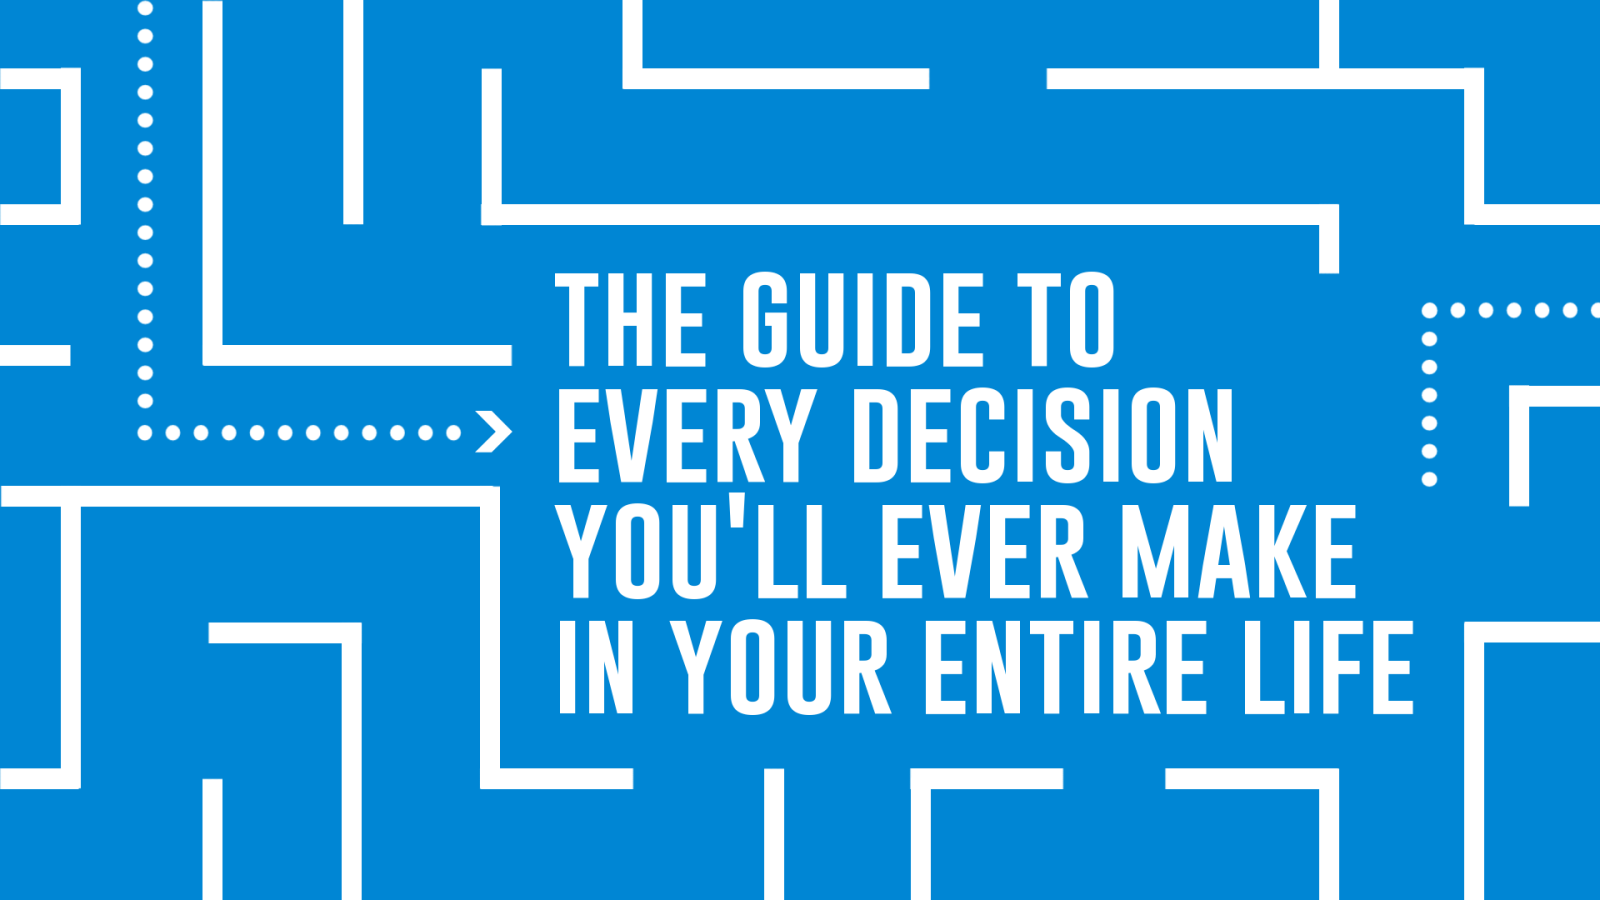 The Guide to Every Decision You'll Ever Make in Your Entire Life